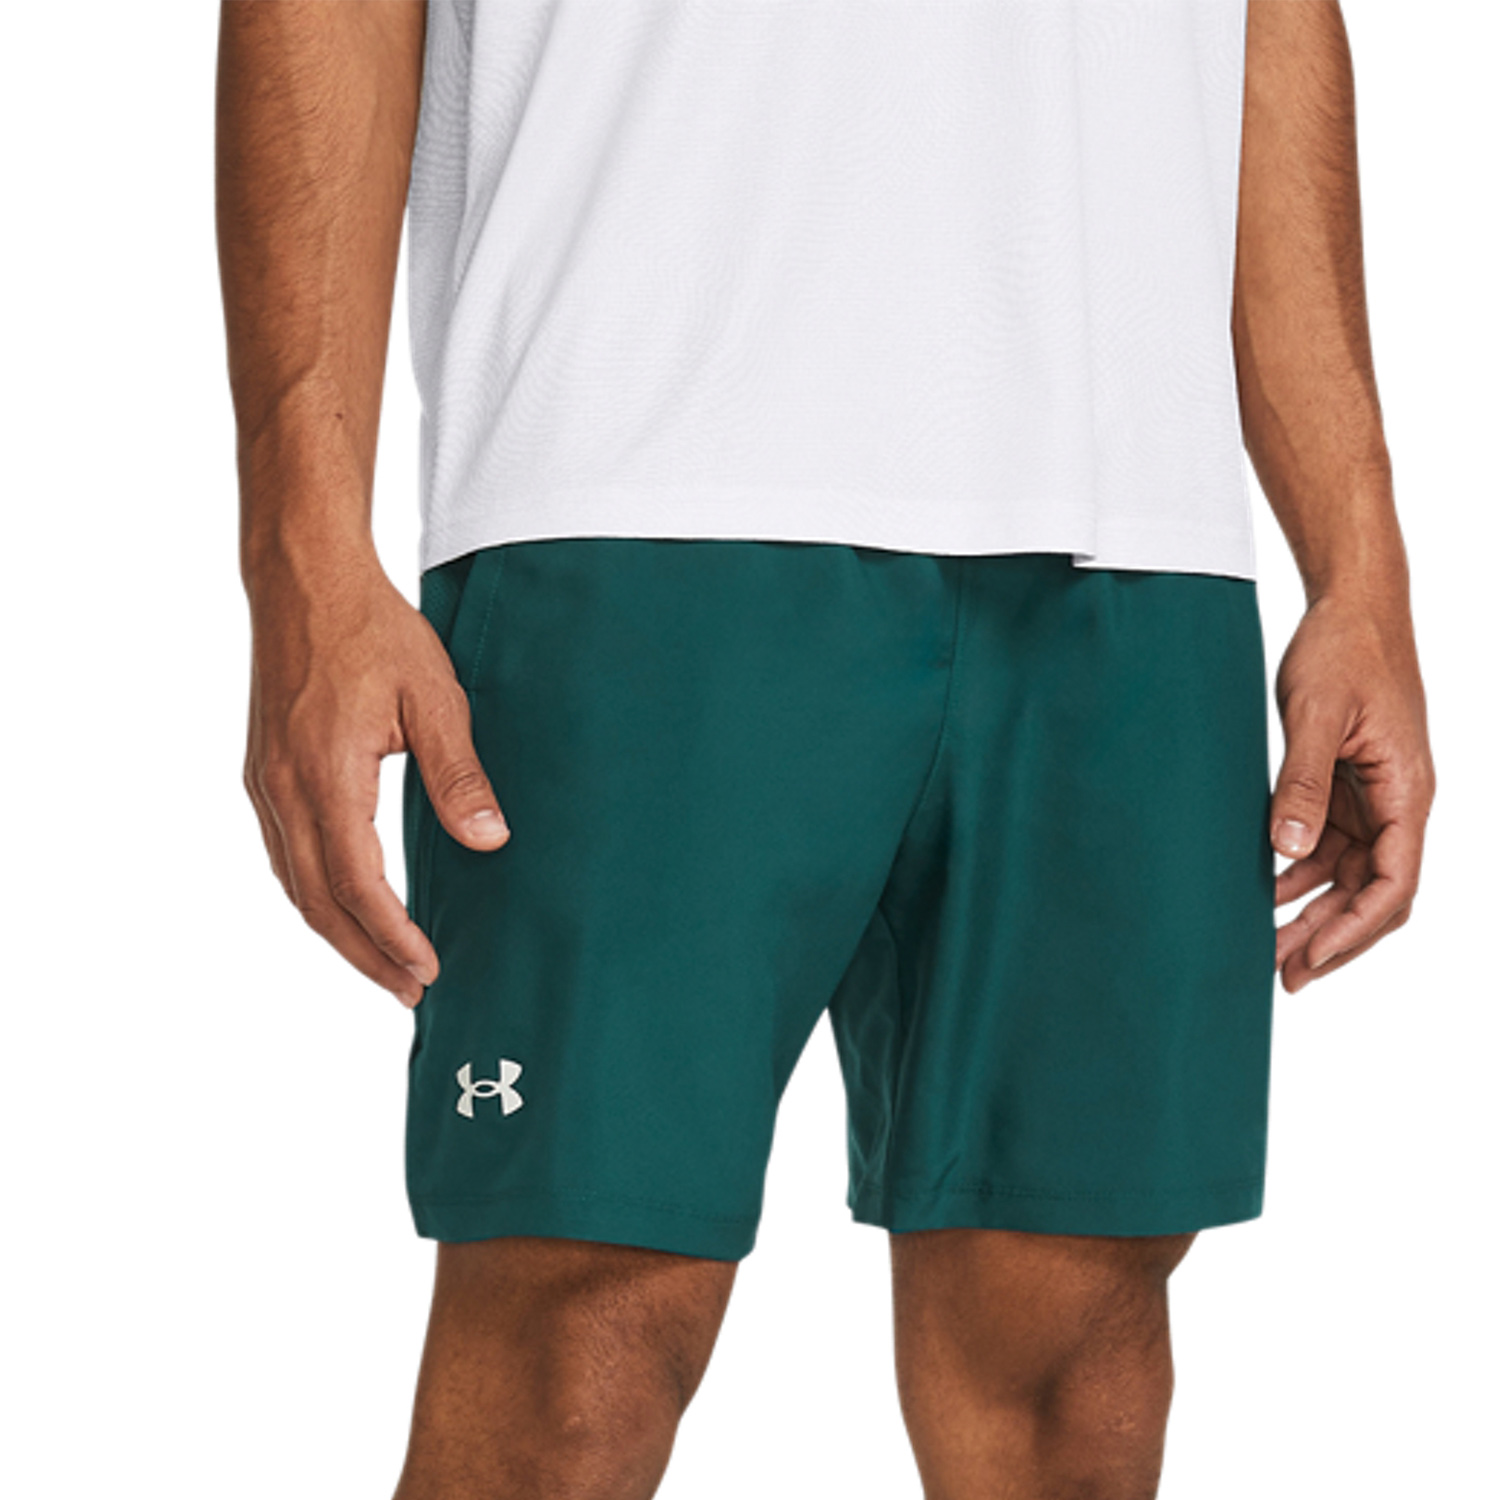 Under Armour Launch 7in Shorts - Hydro Teal/Reflective